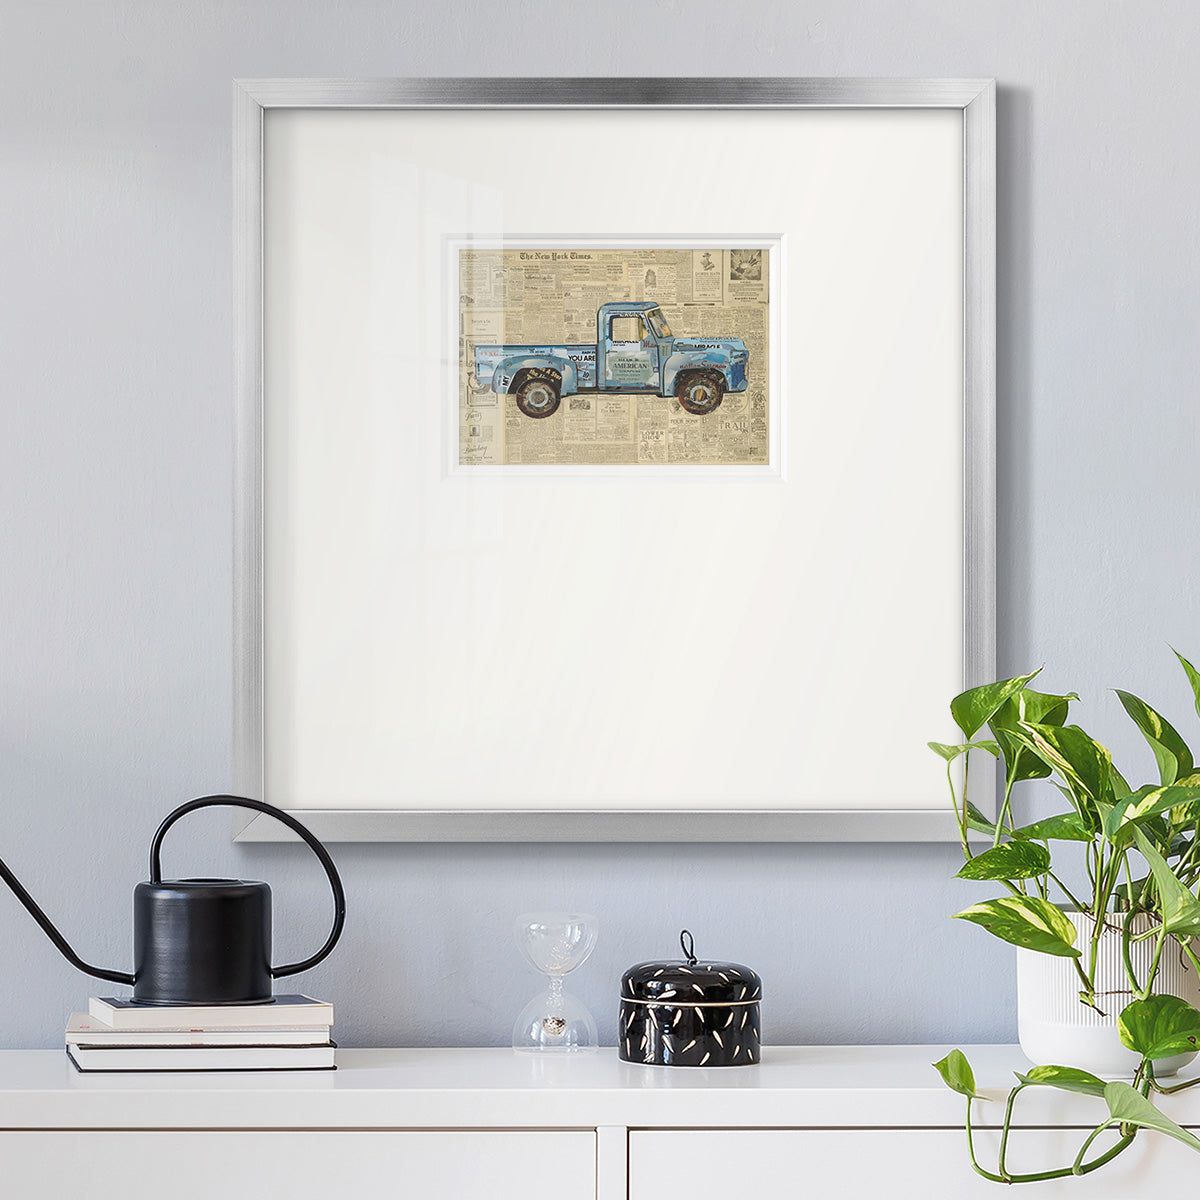 George’s ’53 Ford Premium Framed Print Double Matboard